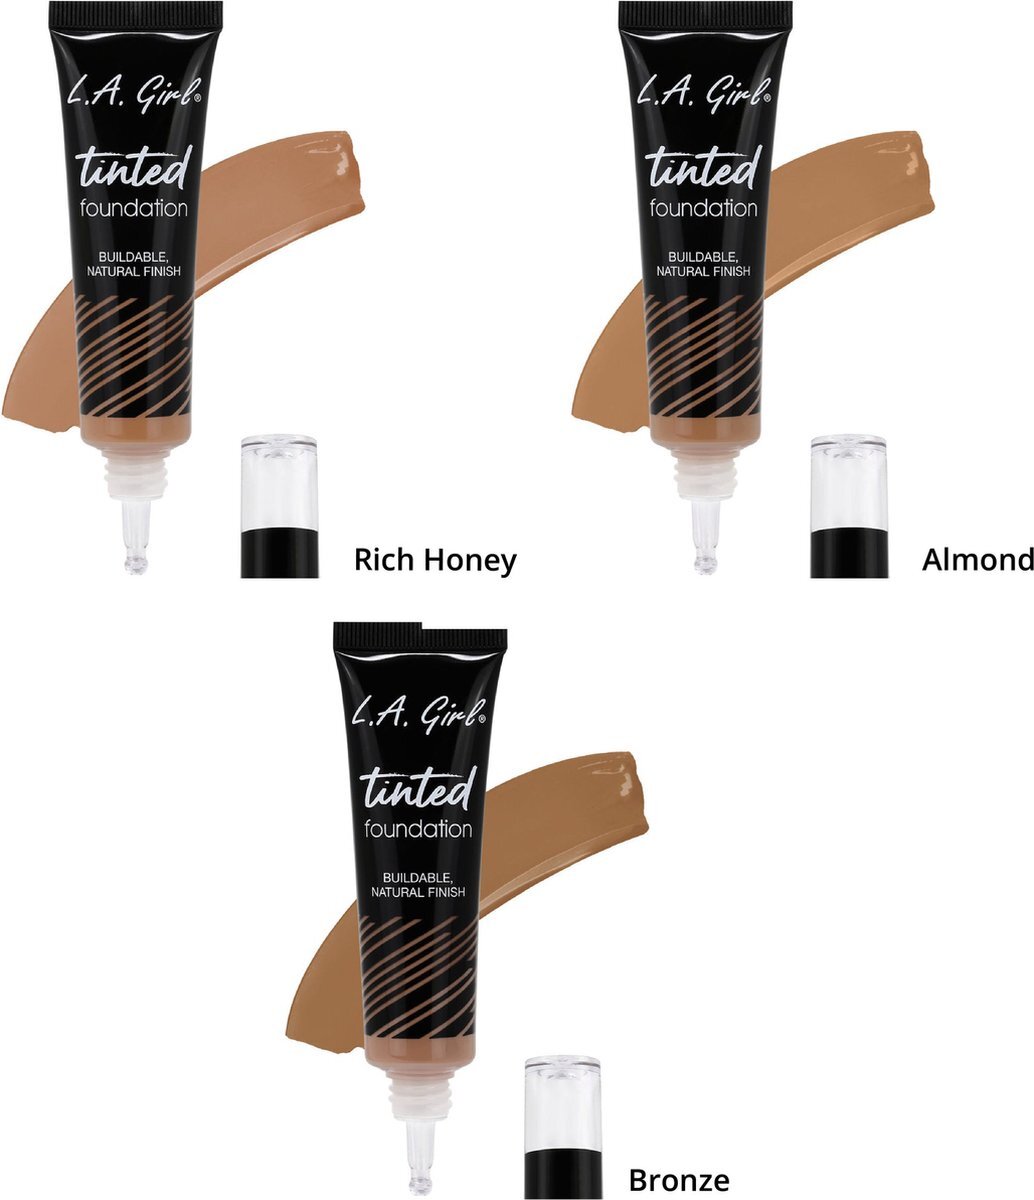 L.A. Girl - Tinted Foundation - Rich Honey